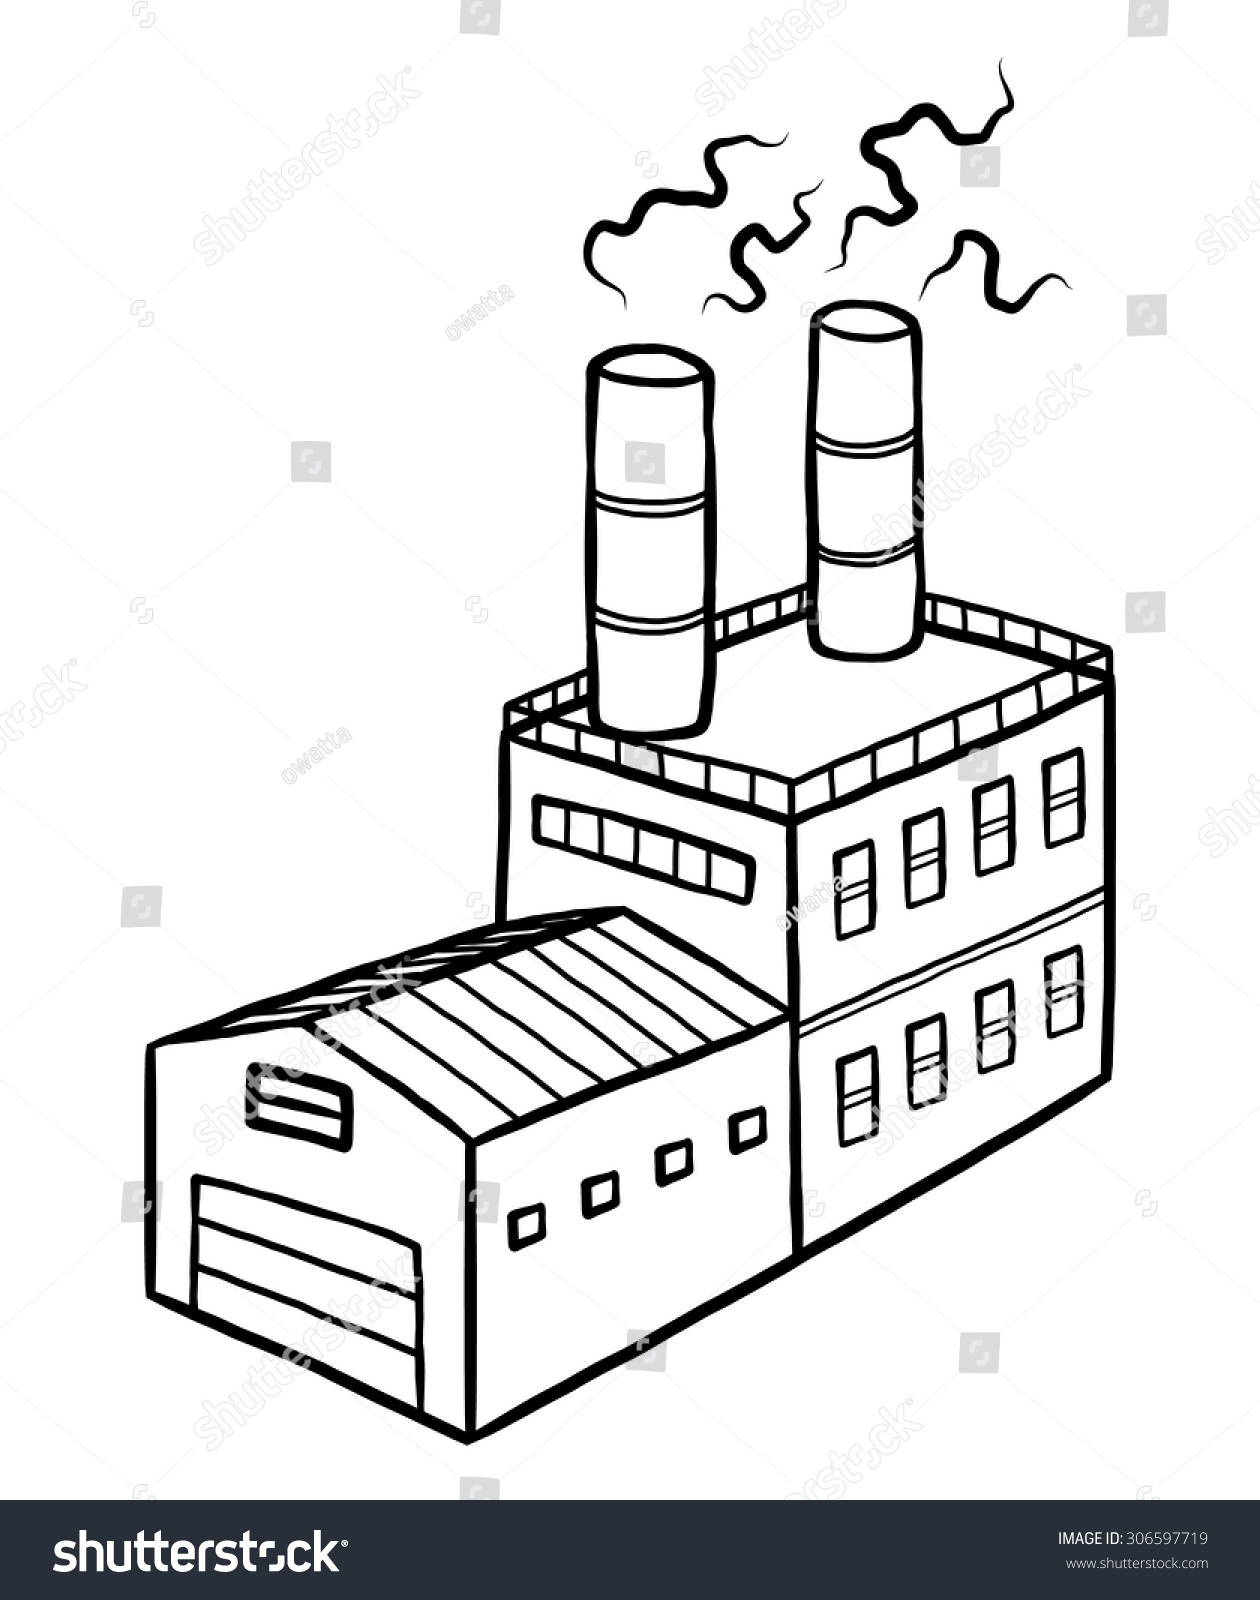 factory clipart - photo #36